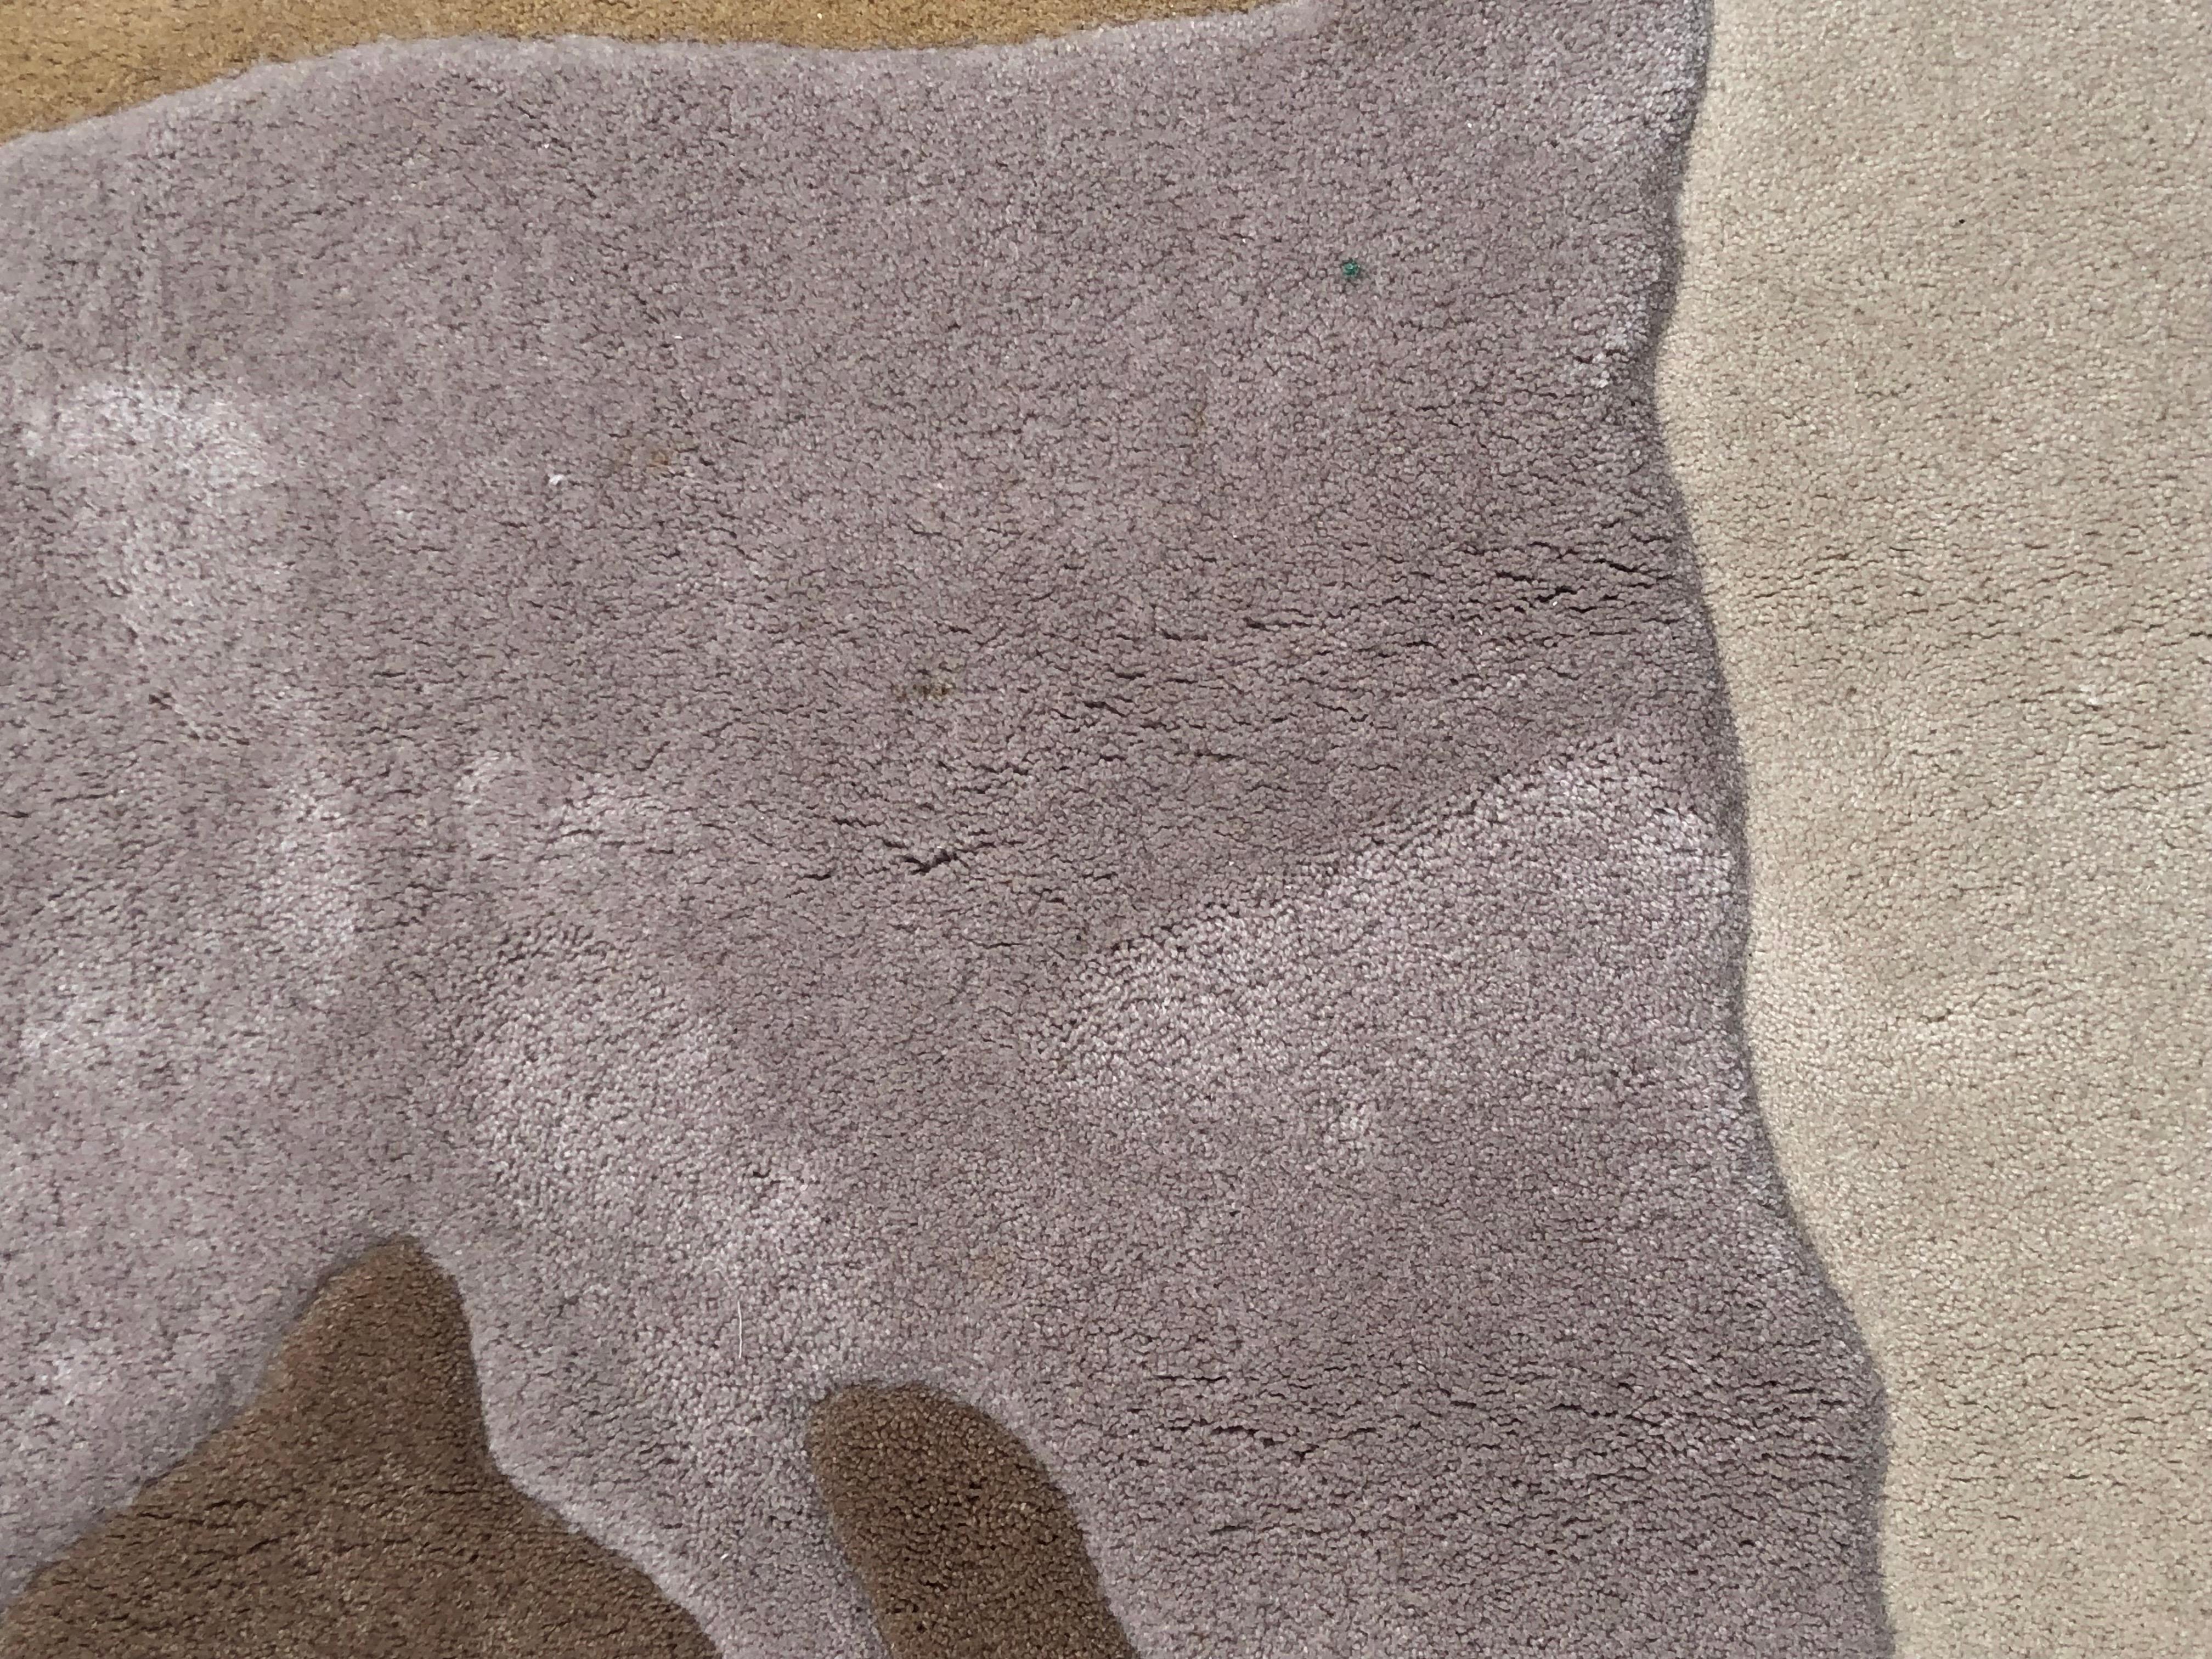 This rug is a harmonious blend of earthy hues, reminiscent of nature's own palette. Intricately tufted into an array of organic shapes, this rug emanates a tranquil ambiance - exactly like the feeling you get when you gaze into the landscape of